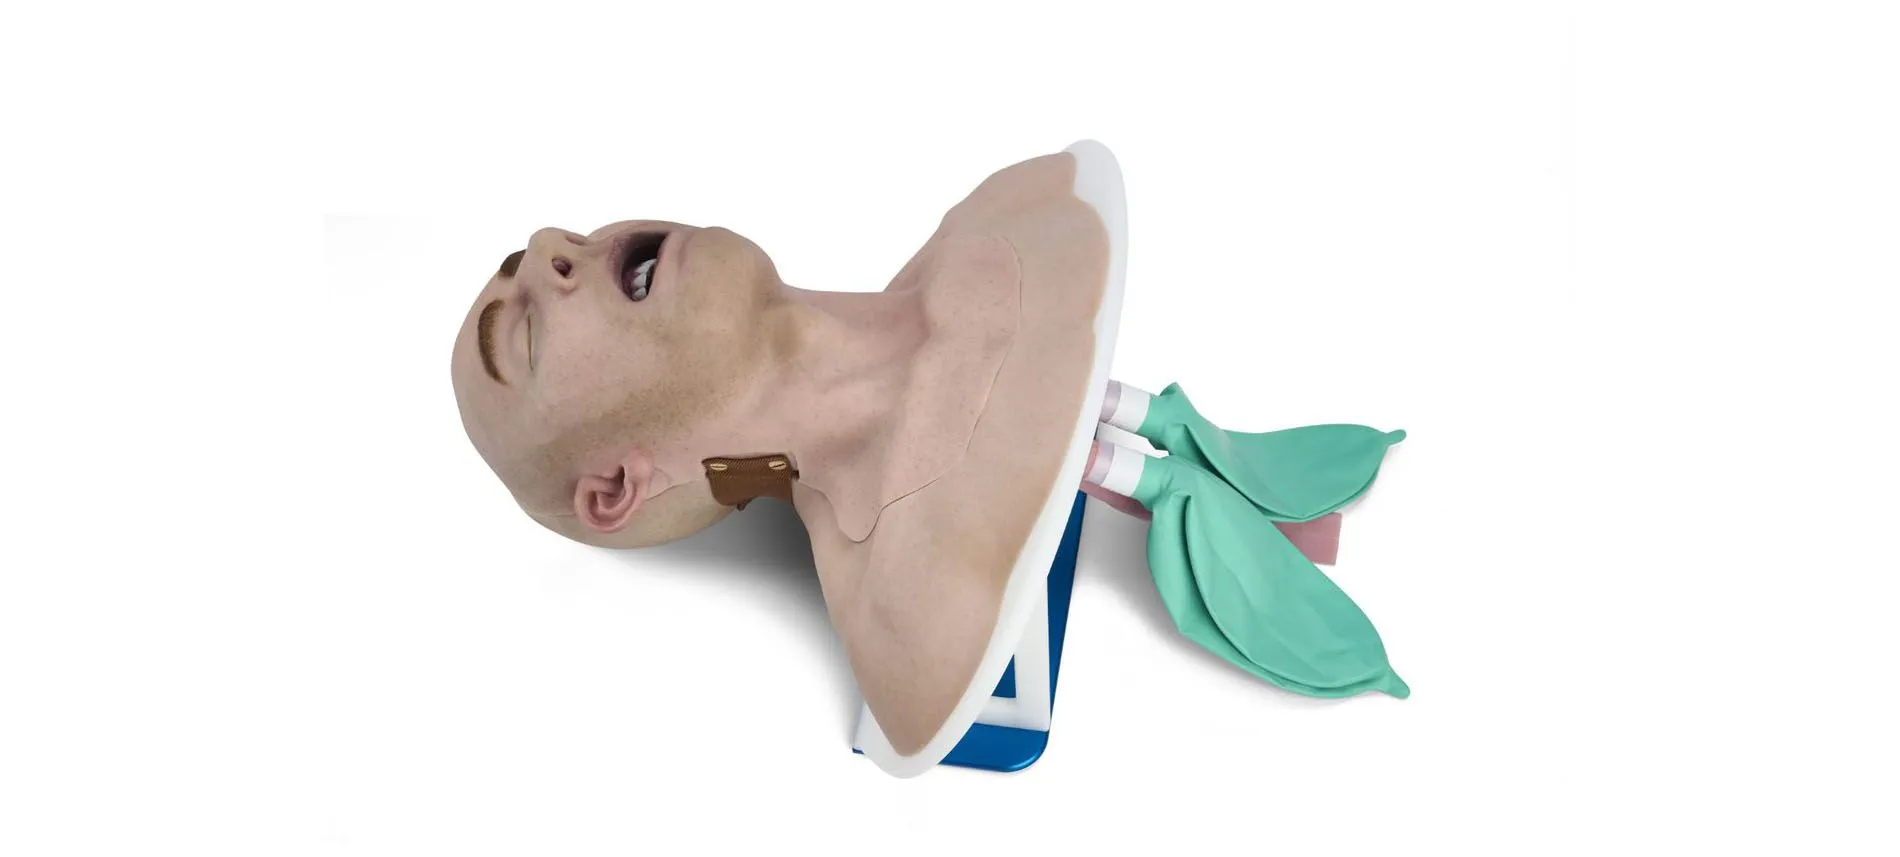 7-SIGMA highly realistic intubation & airway trainer